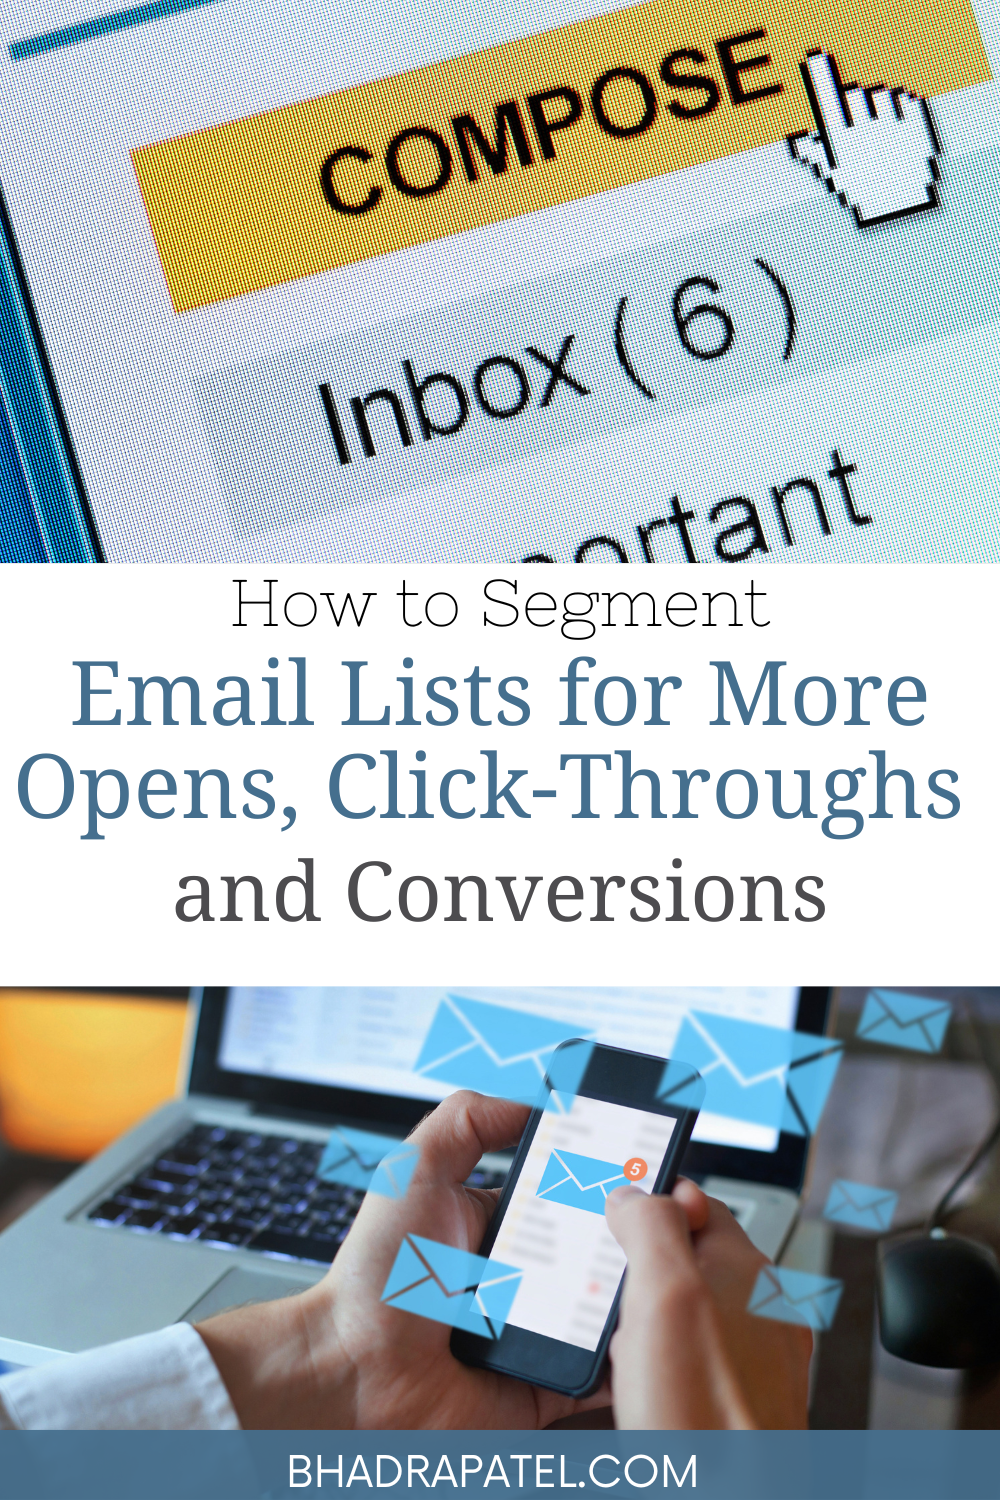 How to Segment Email Lists for More Opens, Click-Throughs and Conversions